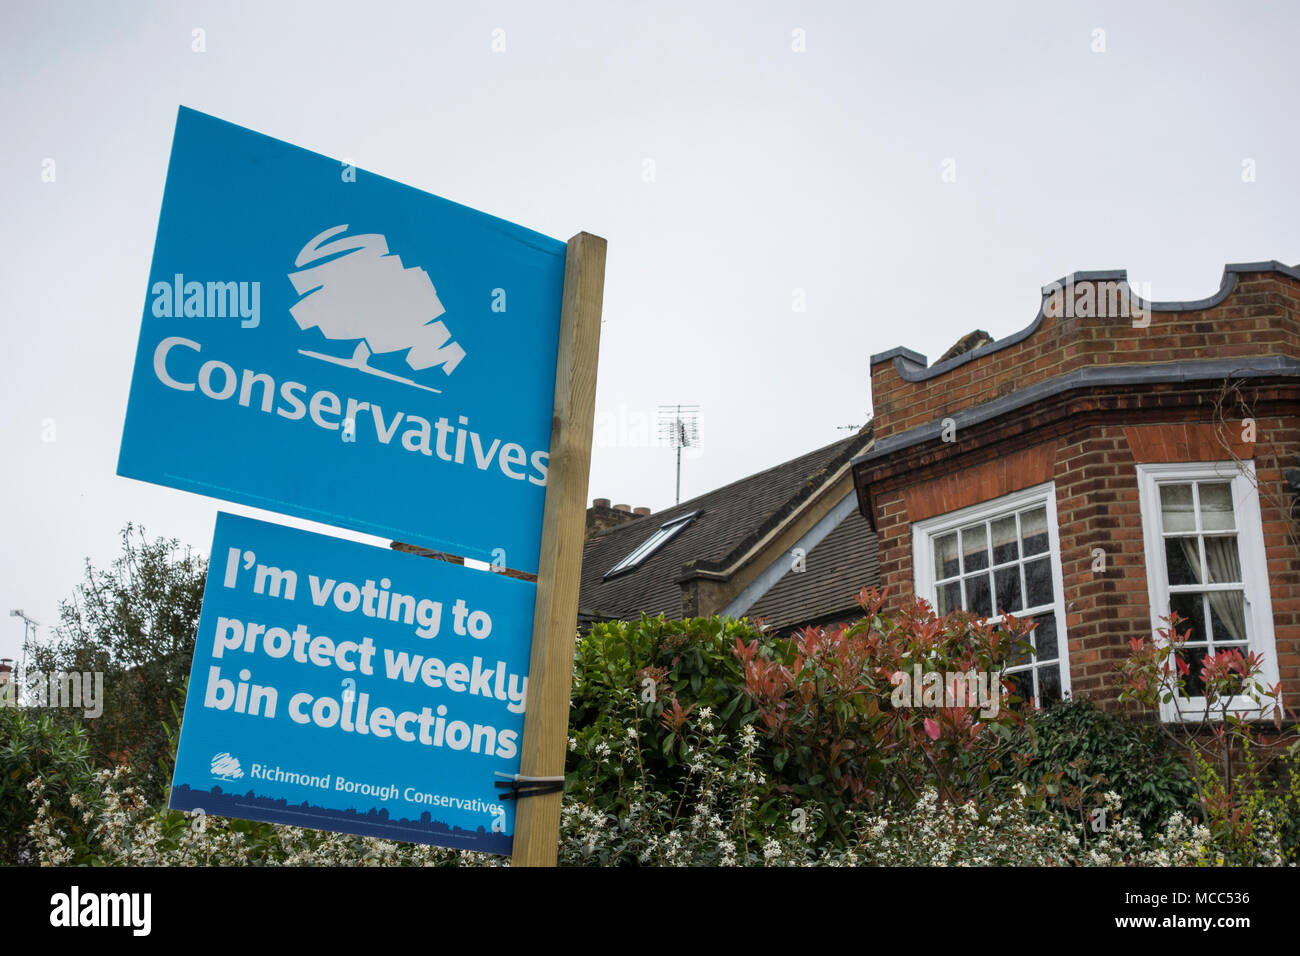 I'm working to protect weekly bin collections  - Conservative local election placard outside a house in SW London, UK Stock Photo